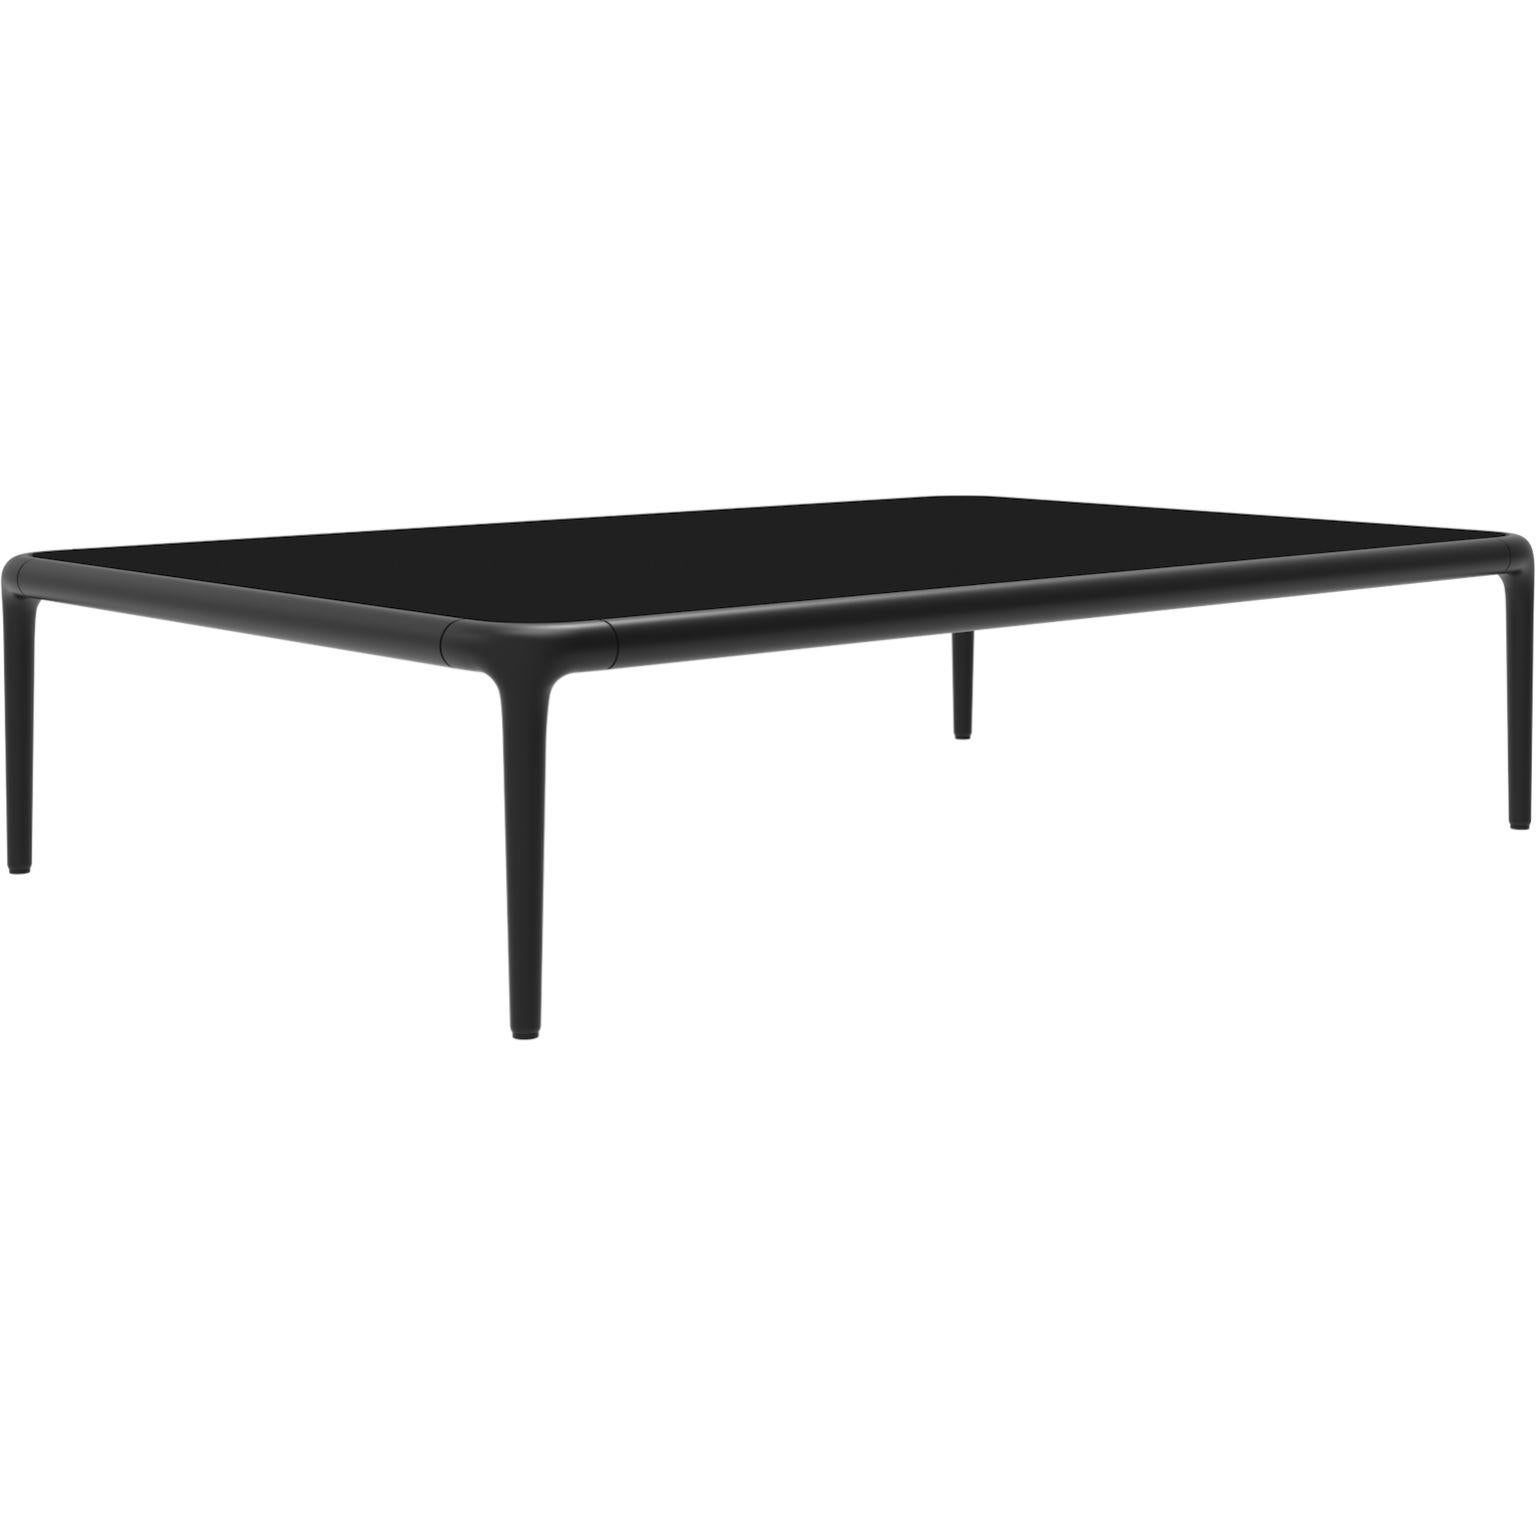 Xaloc black coffee table 120 with glass top by Mowee.
Dimensions: D120 x W80 x H28 cm.
Materials: Aluminum, tinted tempered glass top.
Also available in different aluminum colors and finishes (HPL Black Edge or Neolith). Please contact